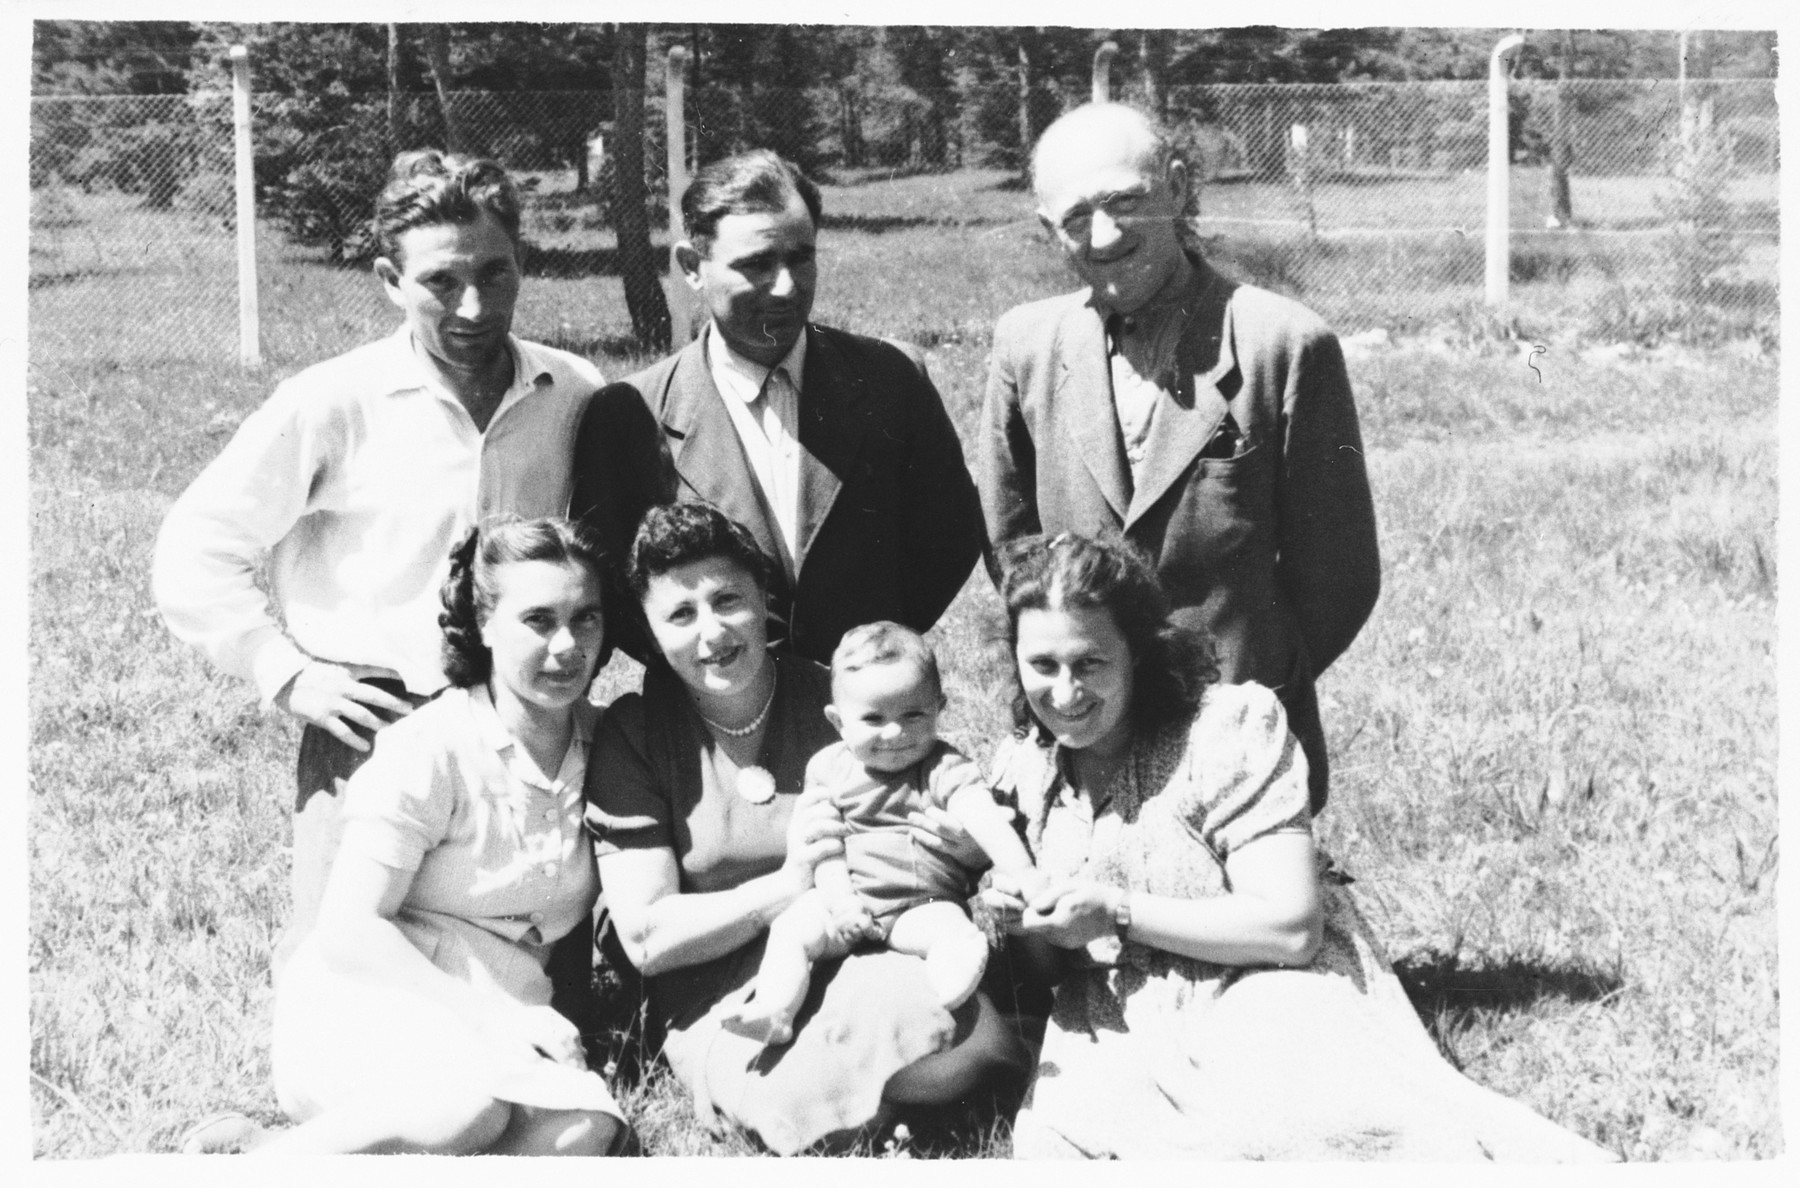 Three families pose together on a grassy field in the Foehrenwald ...